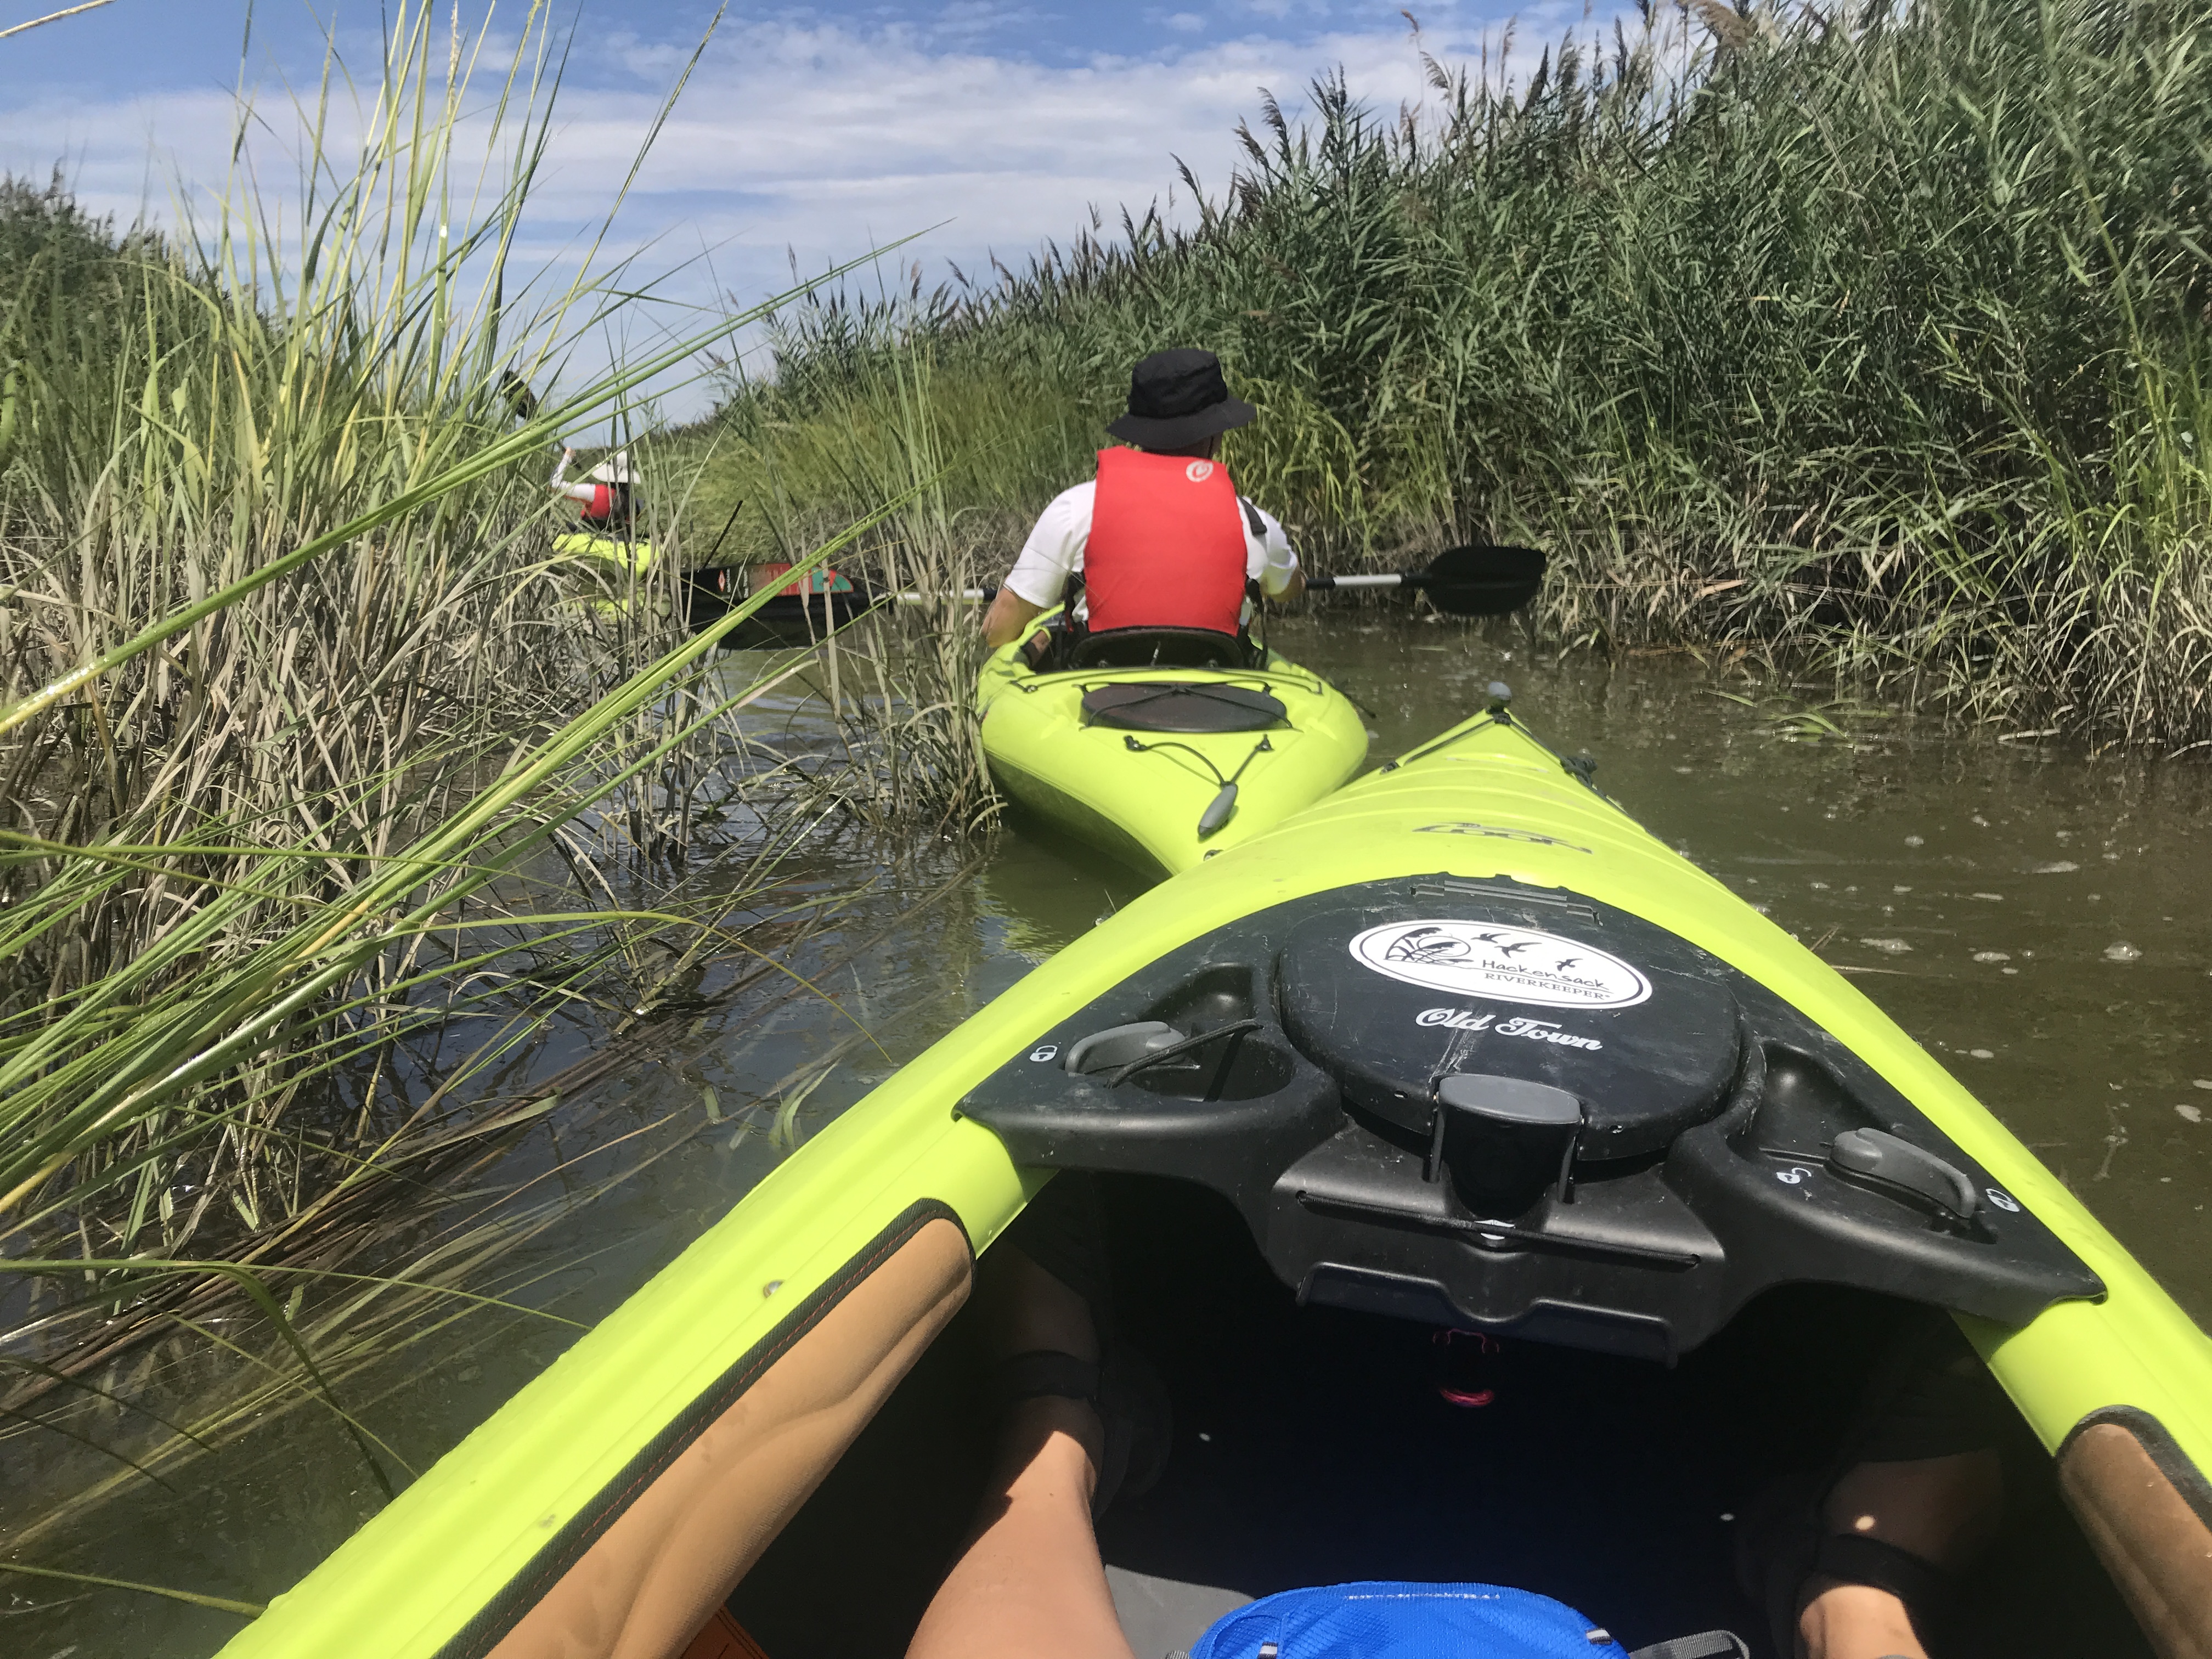 Green kayaks on brownish water make their way through tall wetland grasses. Partly sunny sky with some flat clouds. Hackensack River, Secaucus, New Jersey, United States